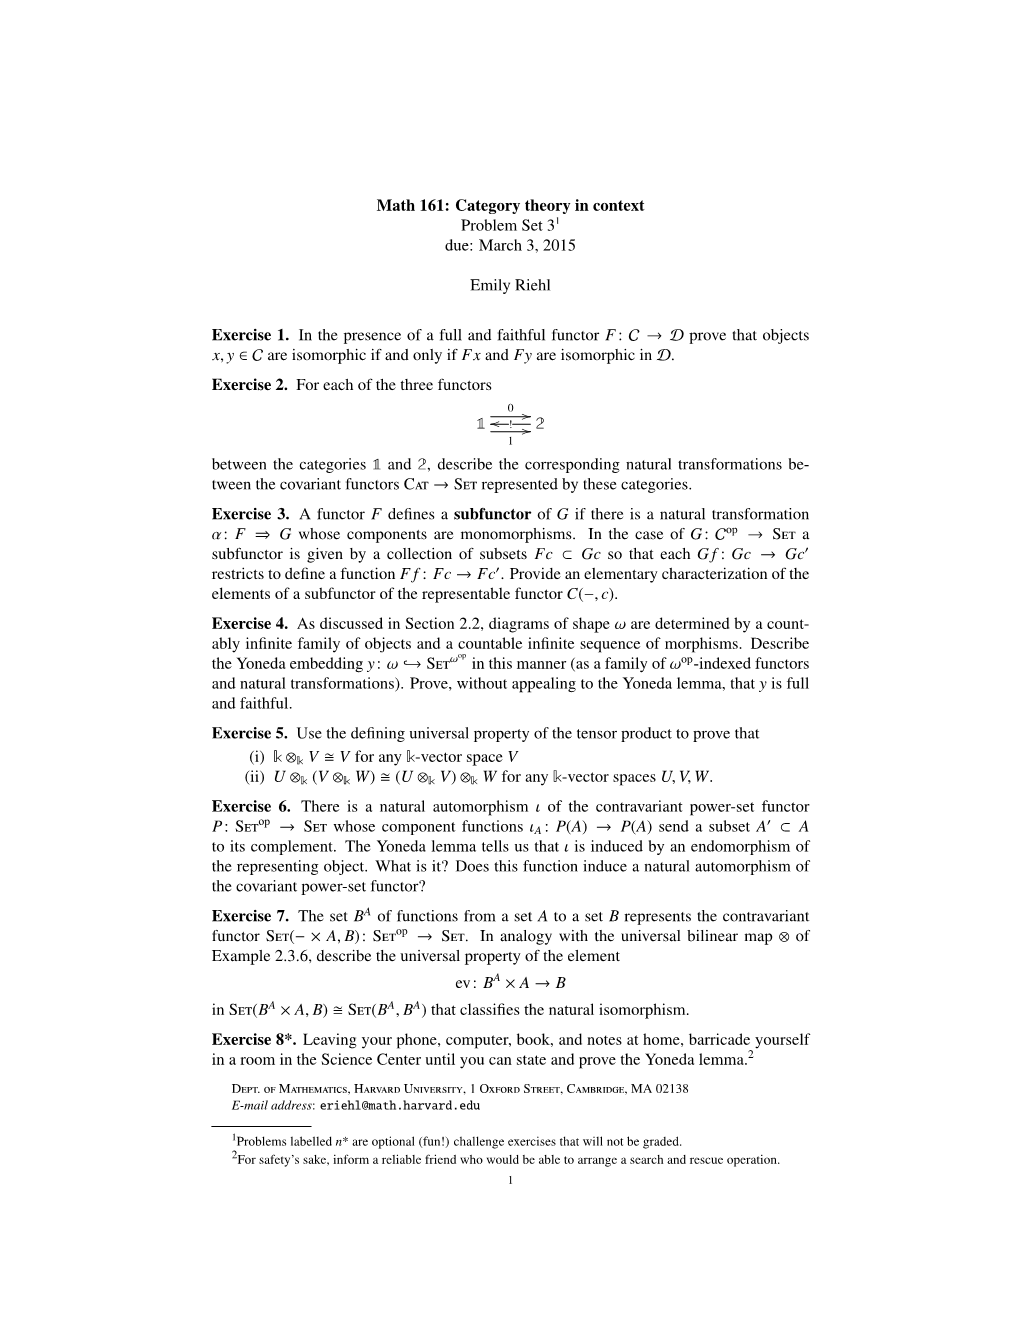 Math 161: Category Theory in Context Problem Set 31 Due: March 3, 2015